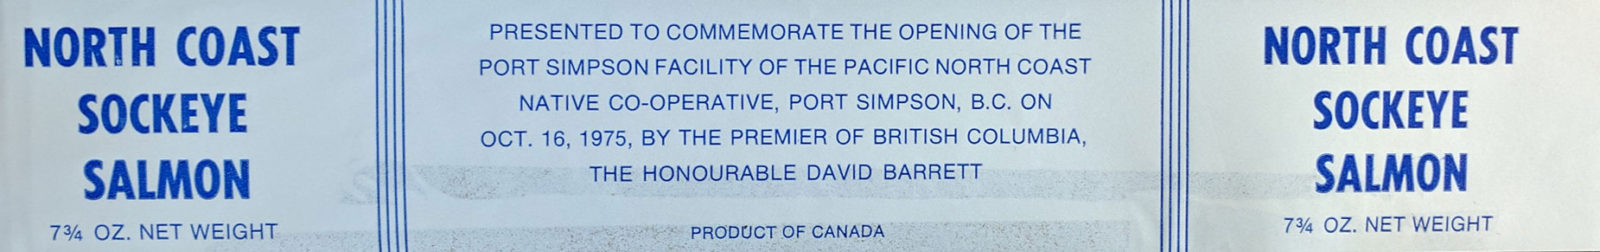 Monochrome blue label features only text, no images. "North Coast Sockeye Salmon. Presented to commemorate the opening of the Port Simpson facility of the Pacific North Coast Native Co-operative, Port Simpson, BC, on Oct 18th 1975 by the Premiere of British Columbia, the Honourable Dave Barrett.